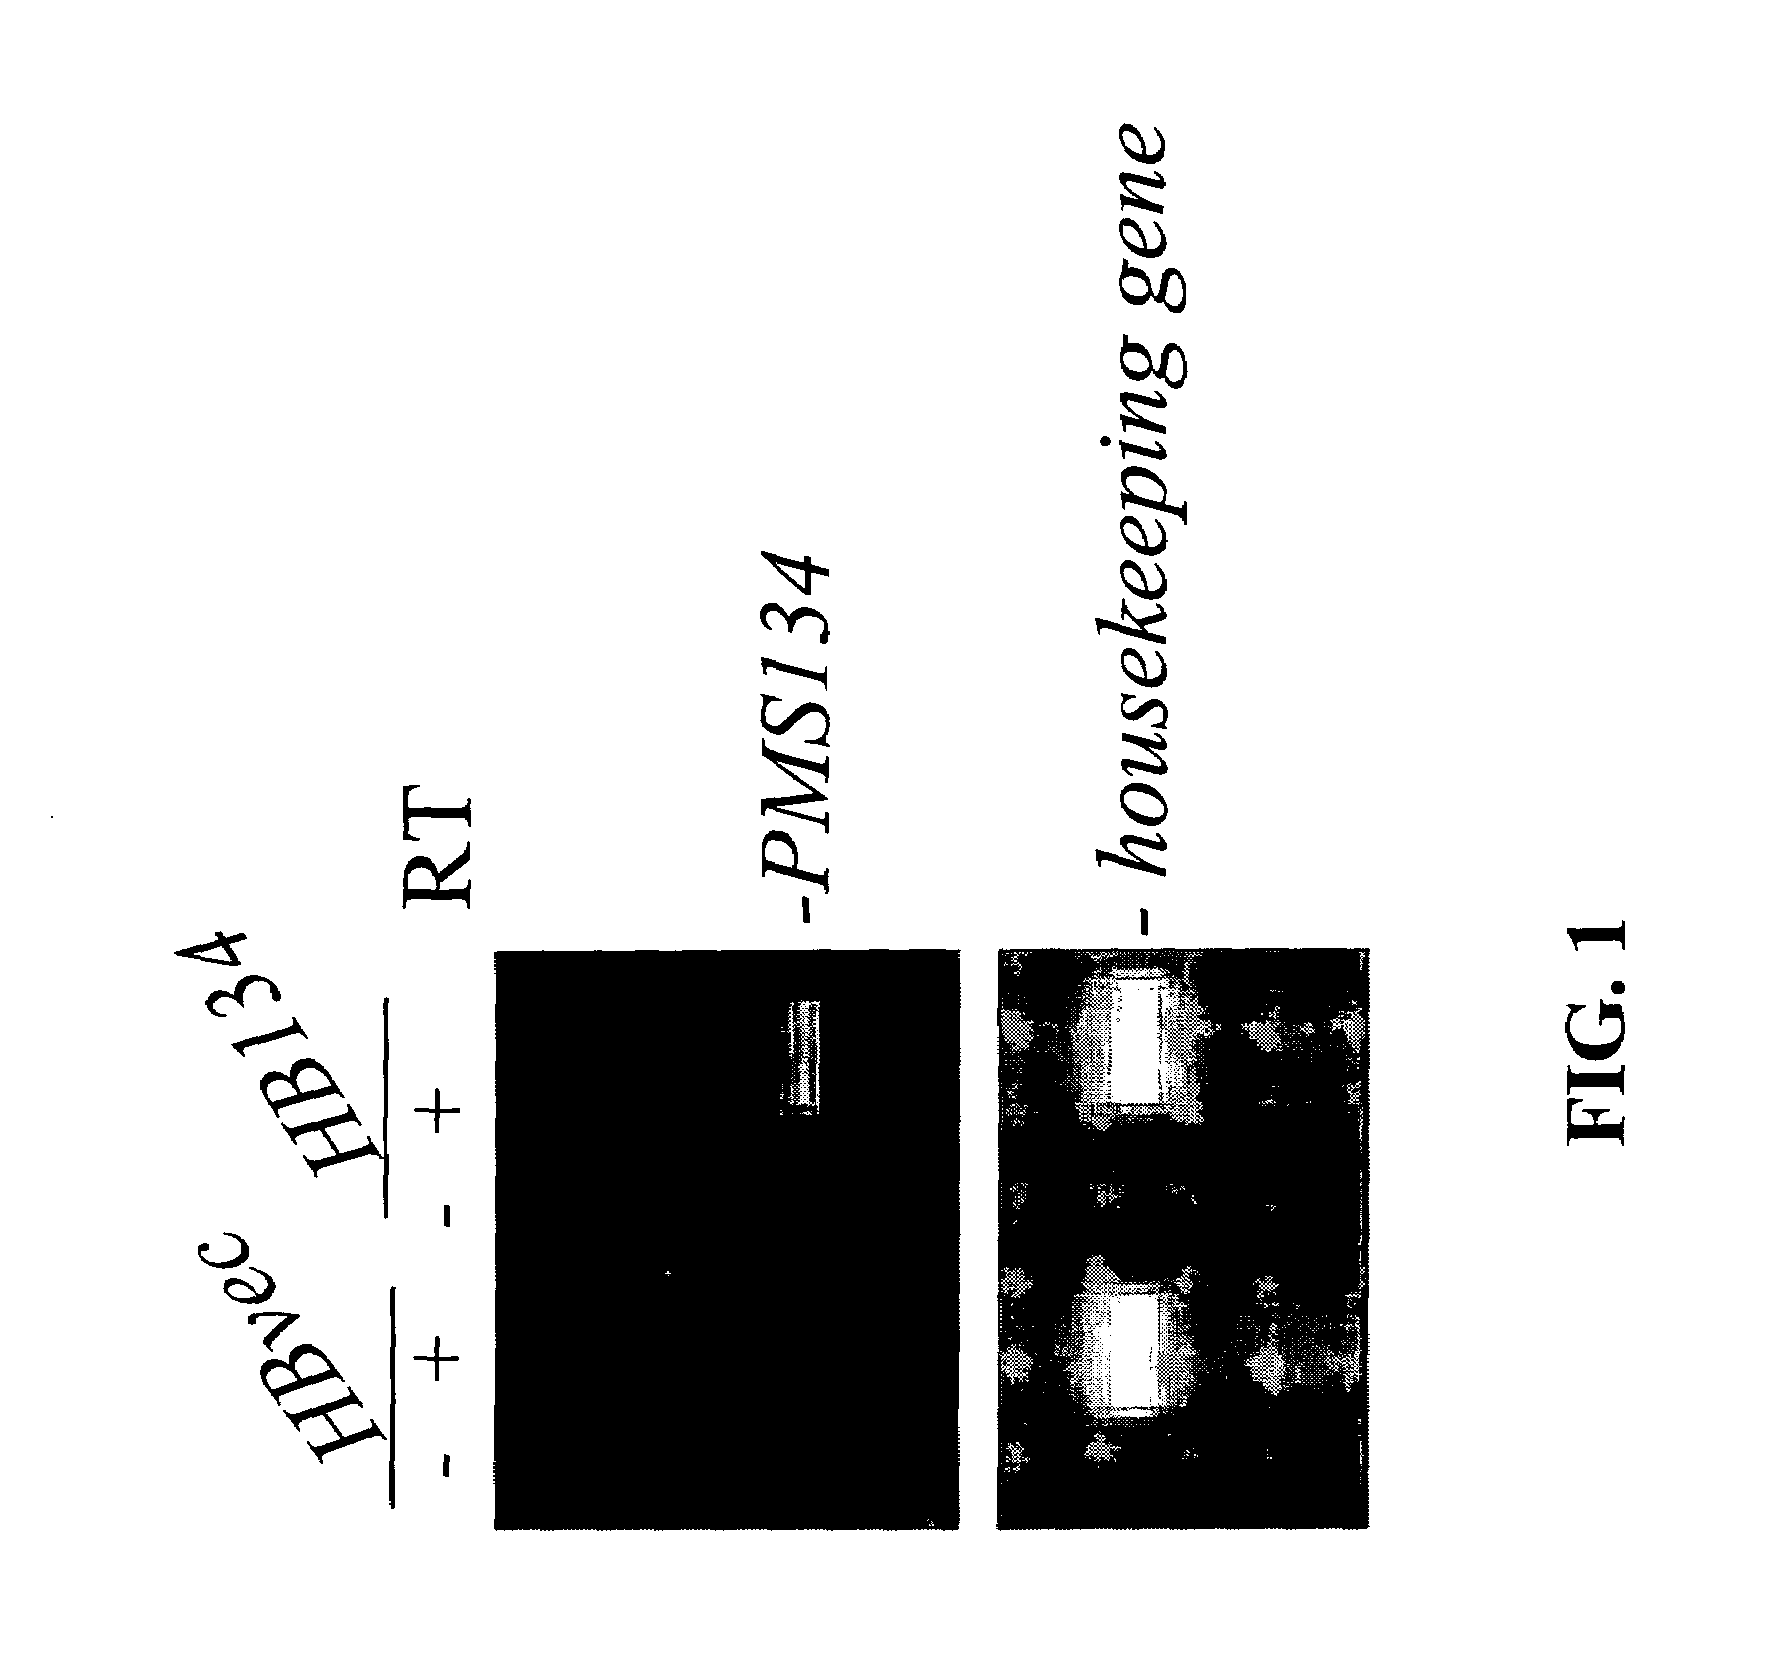 Genetically altered antibody-producing cell lines with improved antibody characteristics